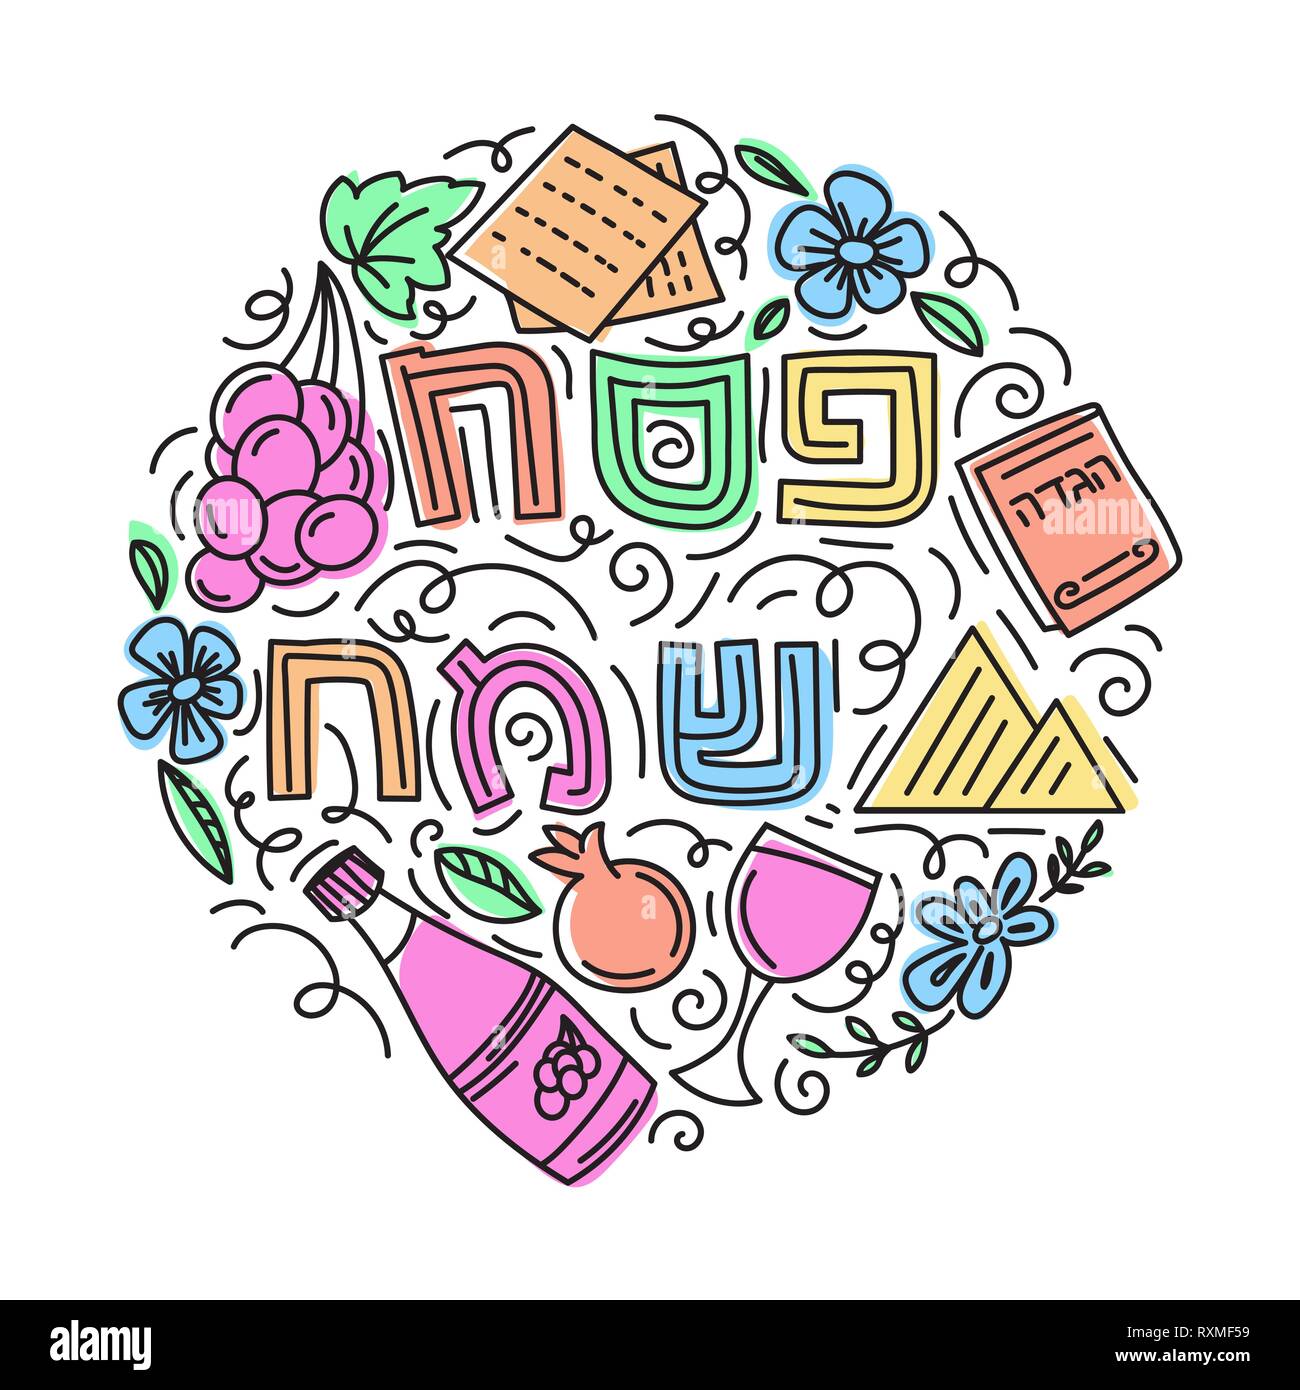 Passover greeting card (Jewish holiday Pesach). Hebrew text: happy Passover. Line art vector illustration. Doodle style. Stock Vector